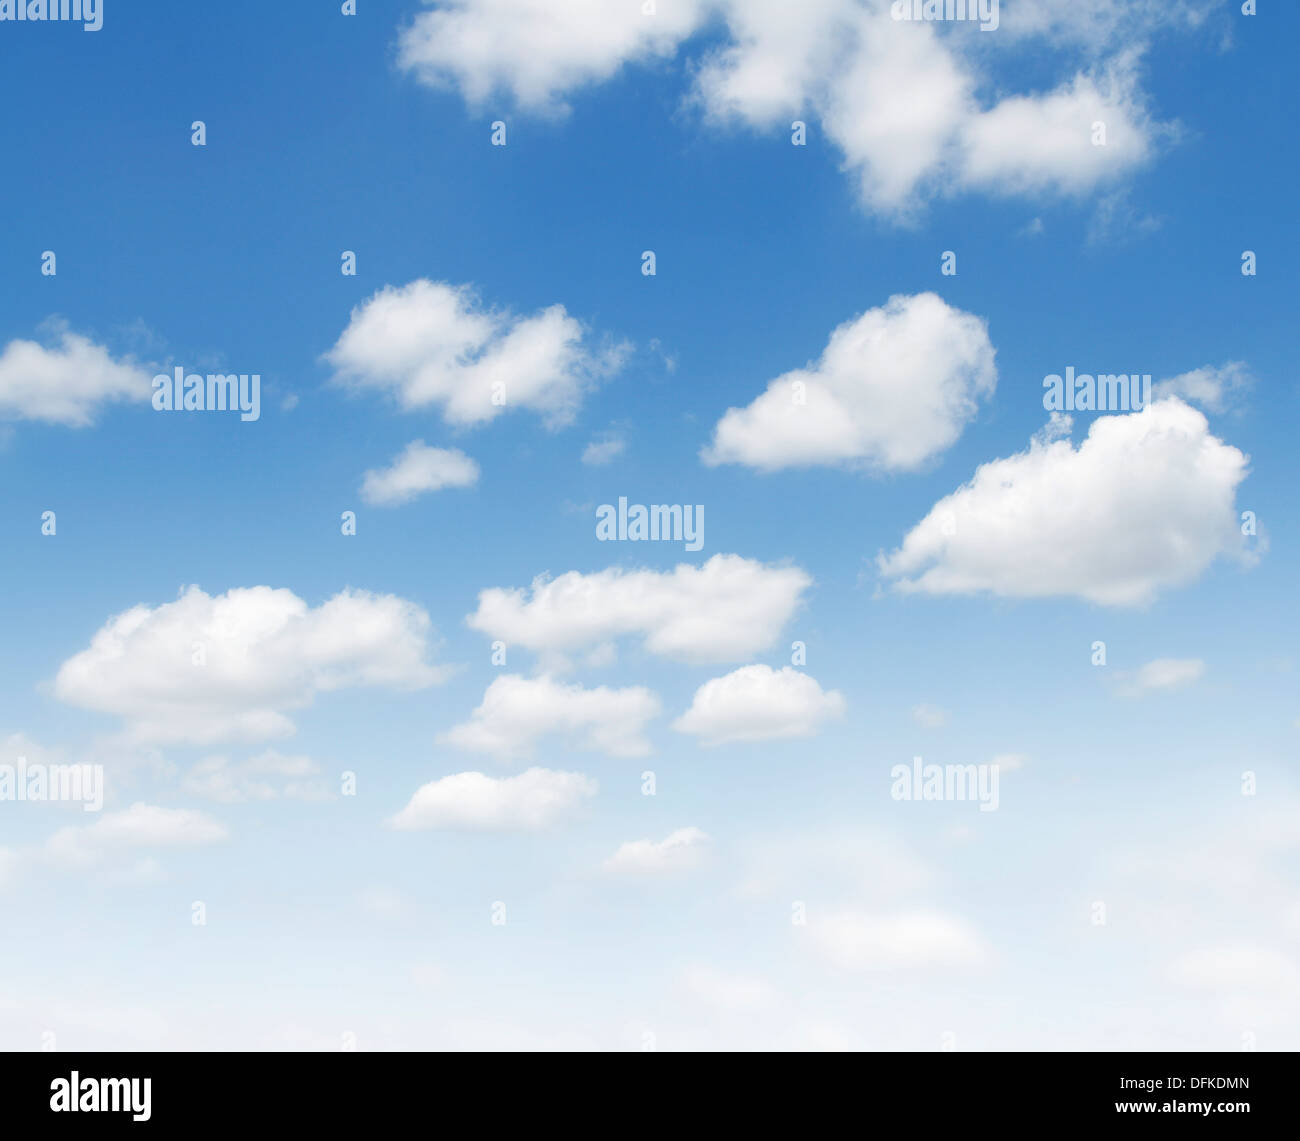 White fluffy clouds in sky Banque D'Images